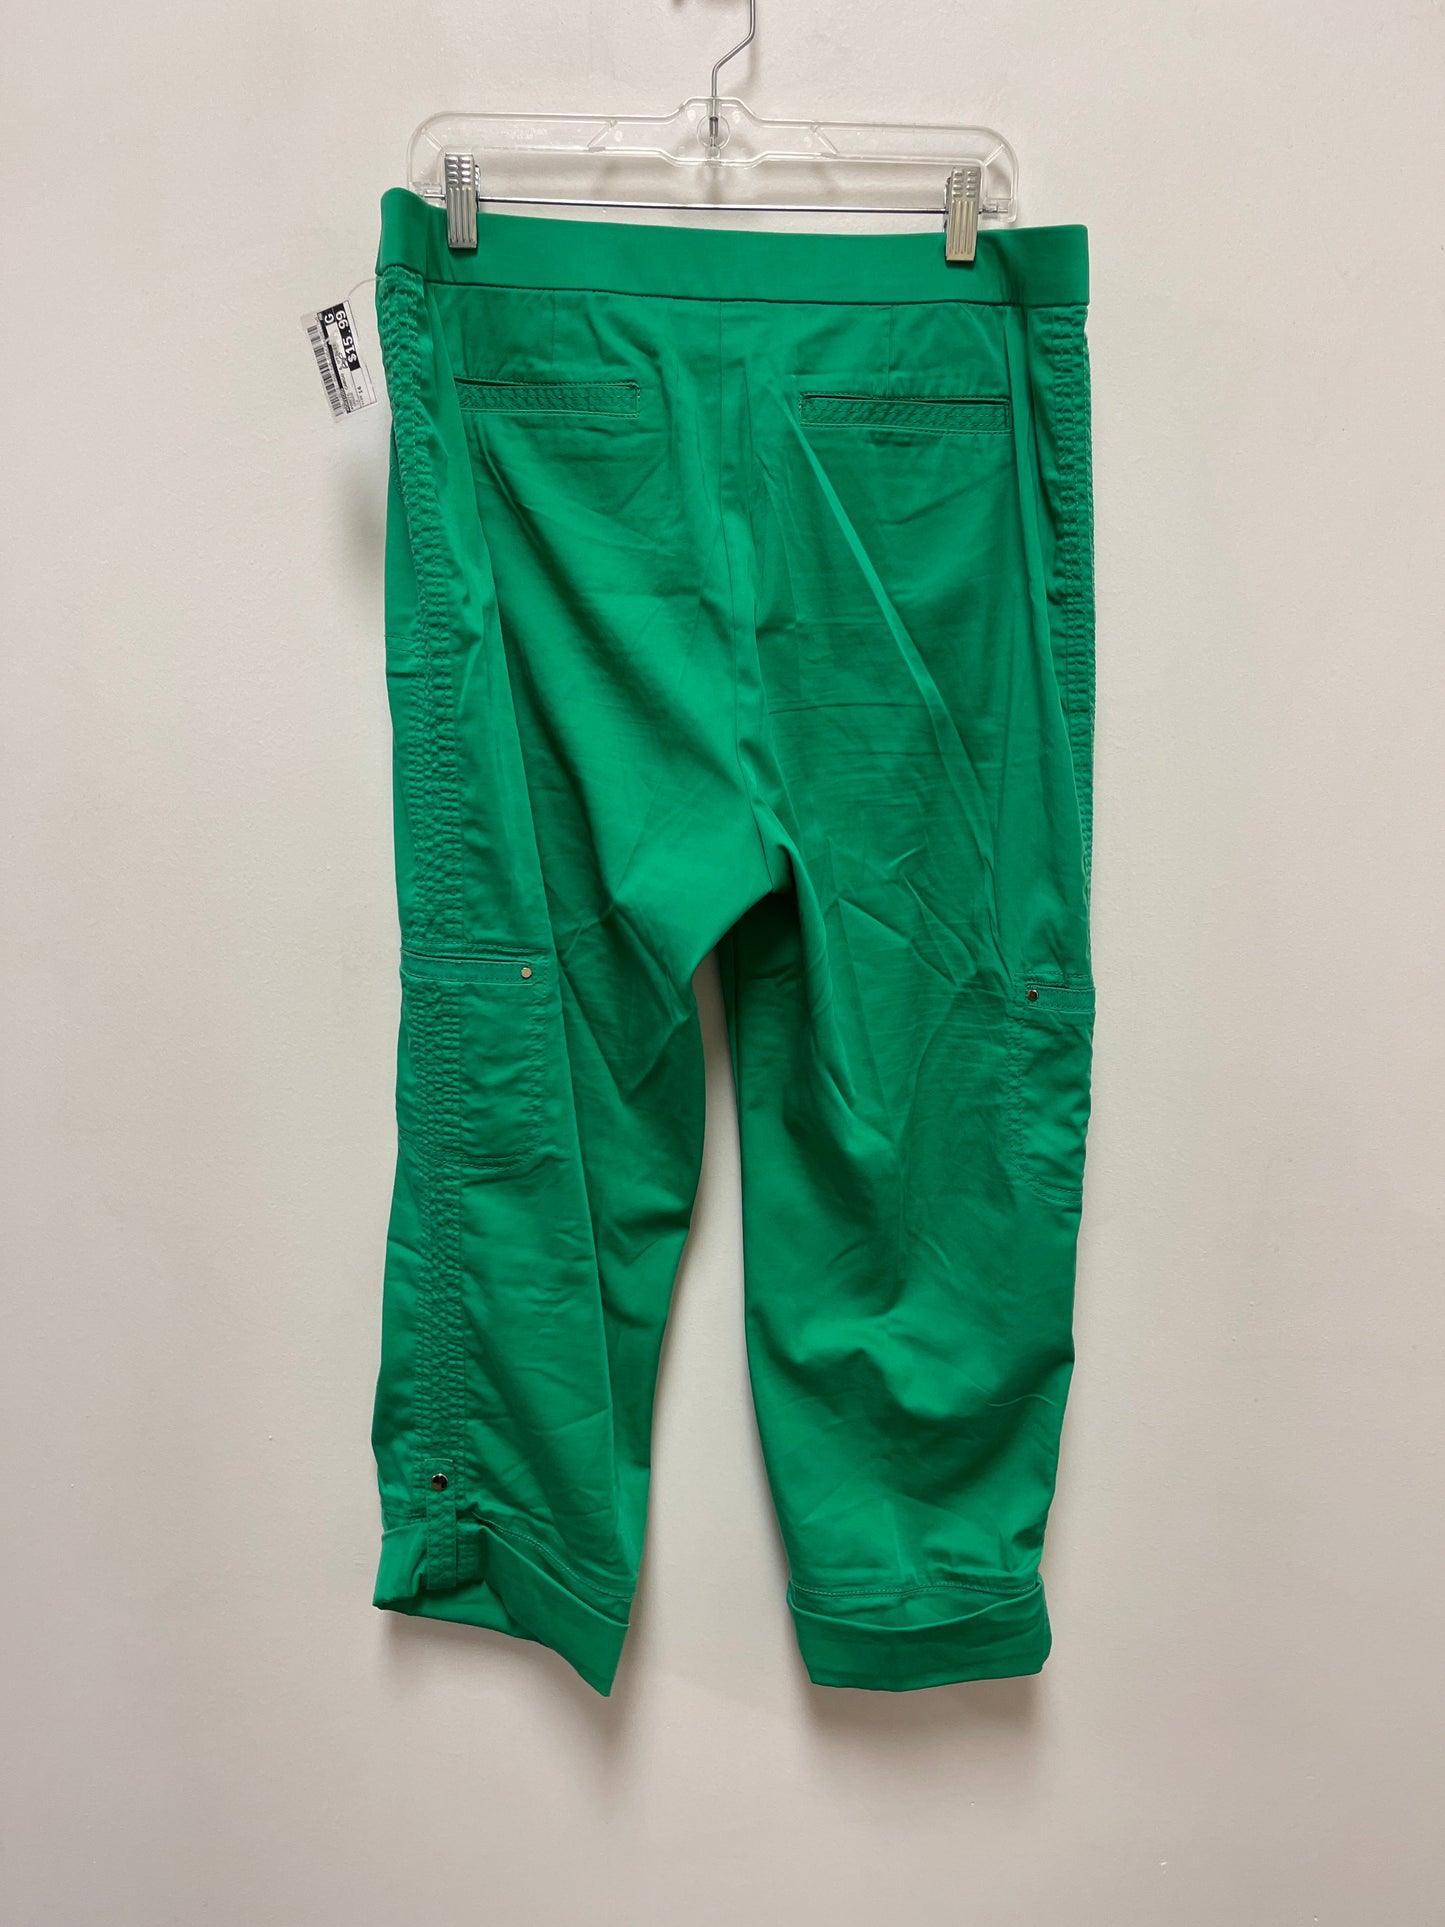 Green Pants Cargo & Utility Chicos, Size 14